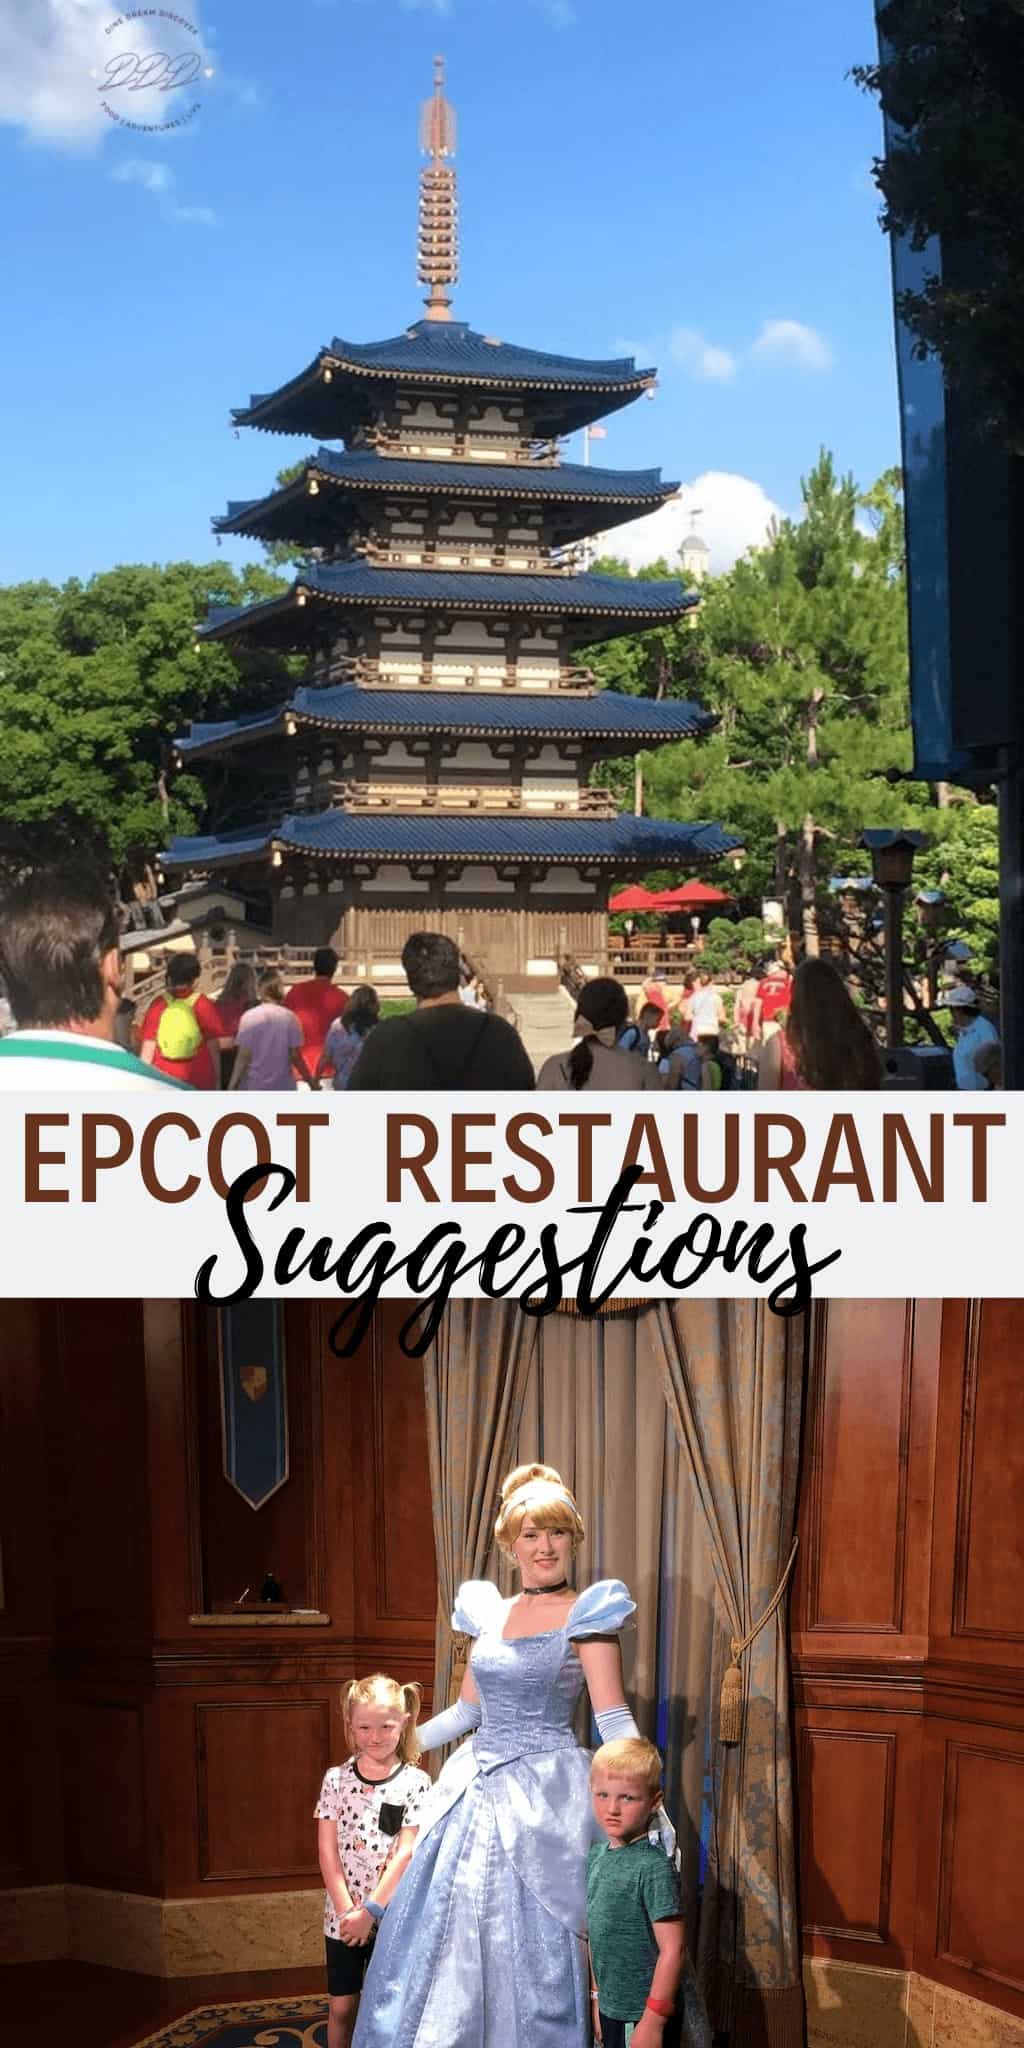 Based on the path you might map out for yourself, here are some Epcot restaurant suggestions for meals throughout your day.